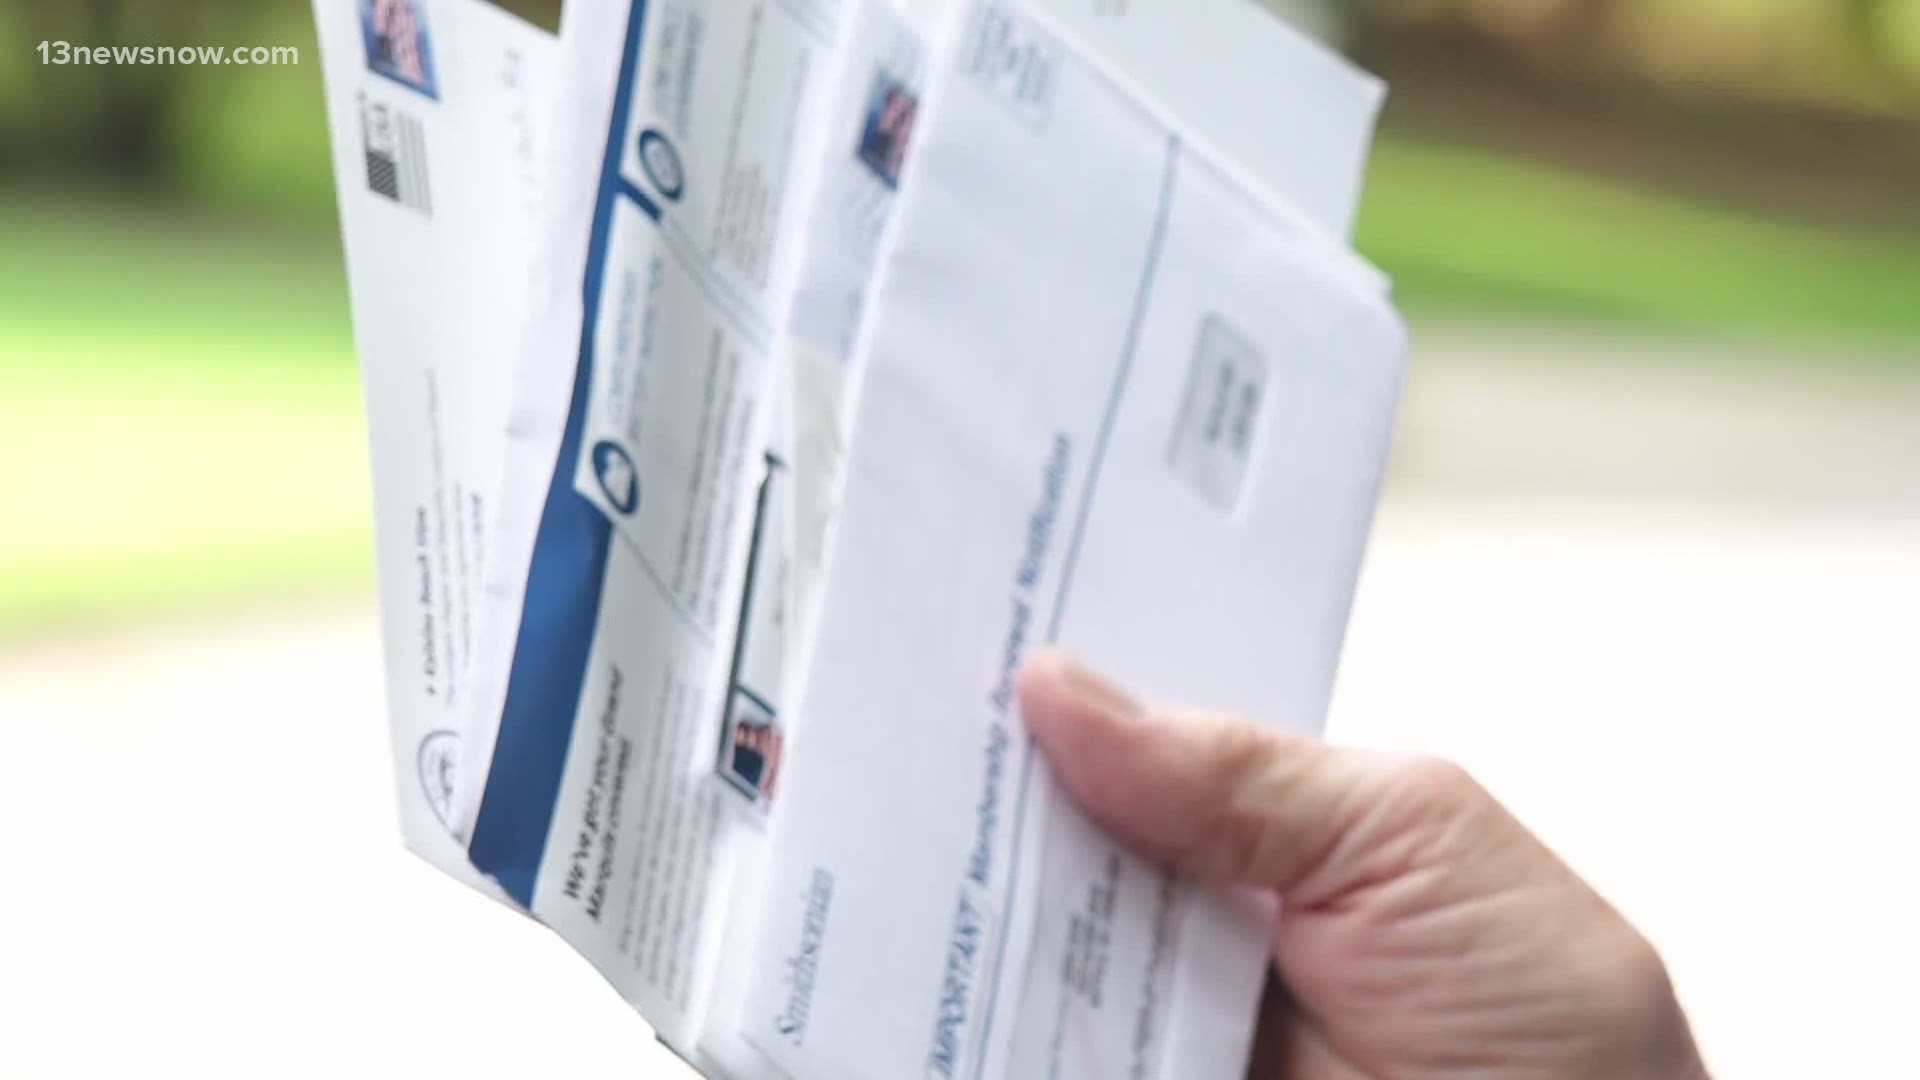 Two Suffolk homeowners say their mail is being delivered late, and it may be due to a new policy from the postmaster general.